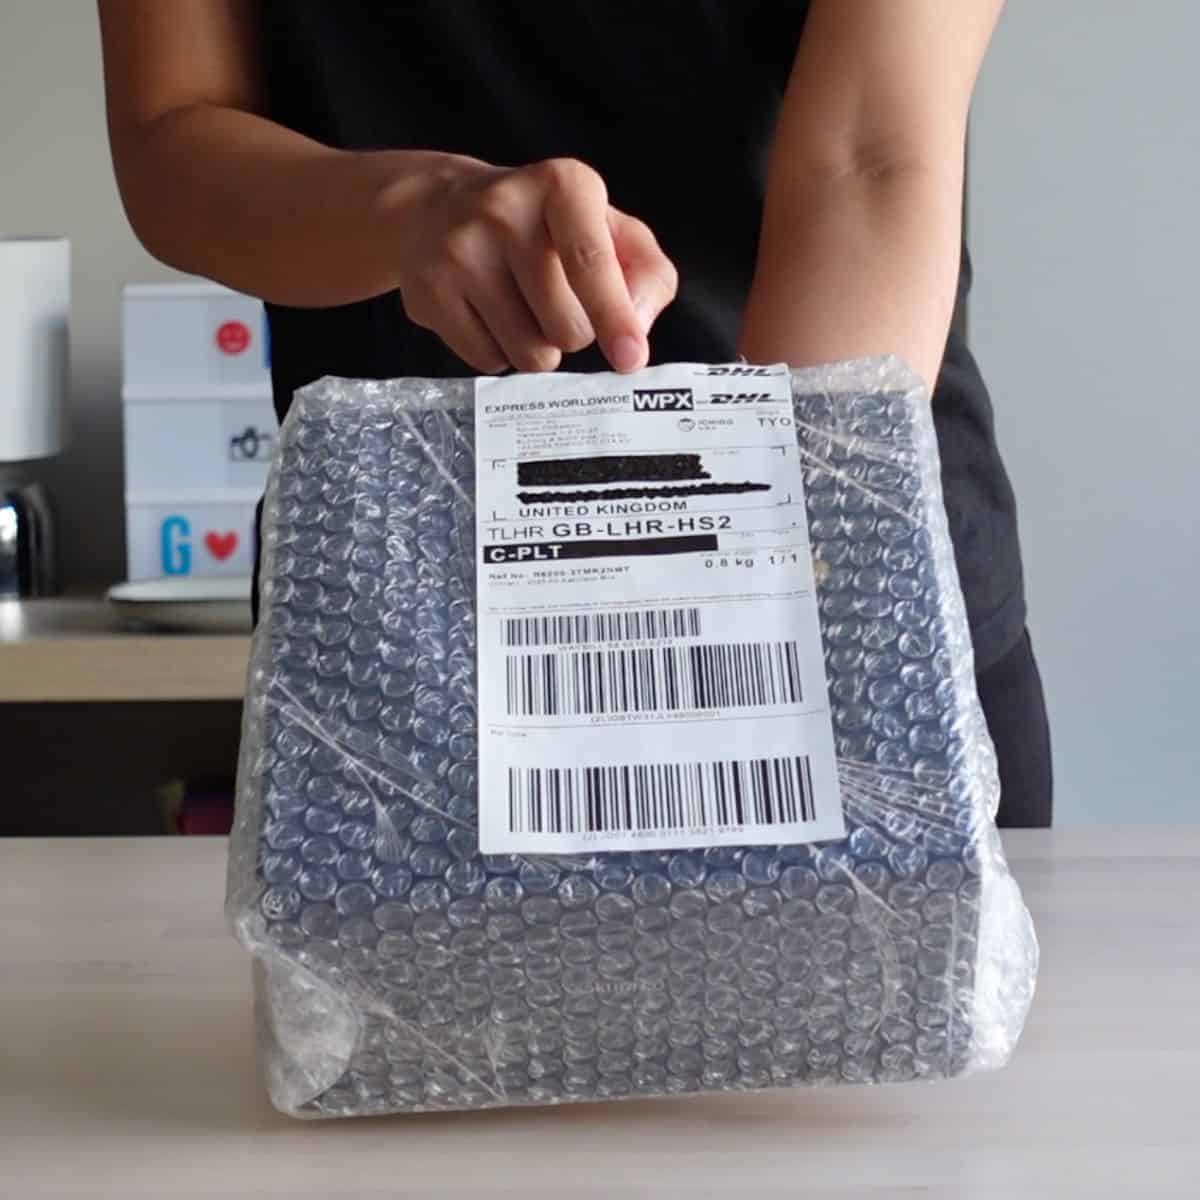 Bubble wrap delivery of asian treat package